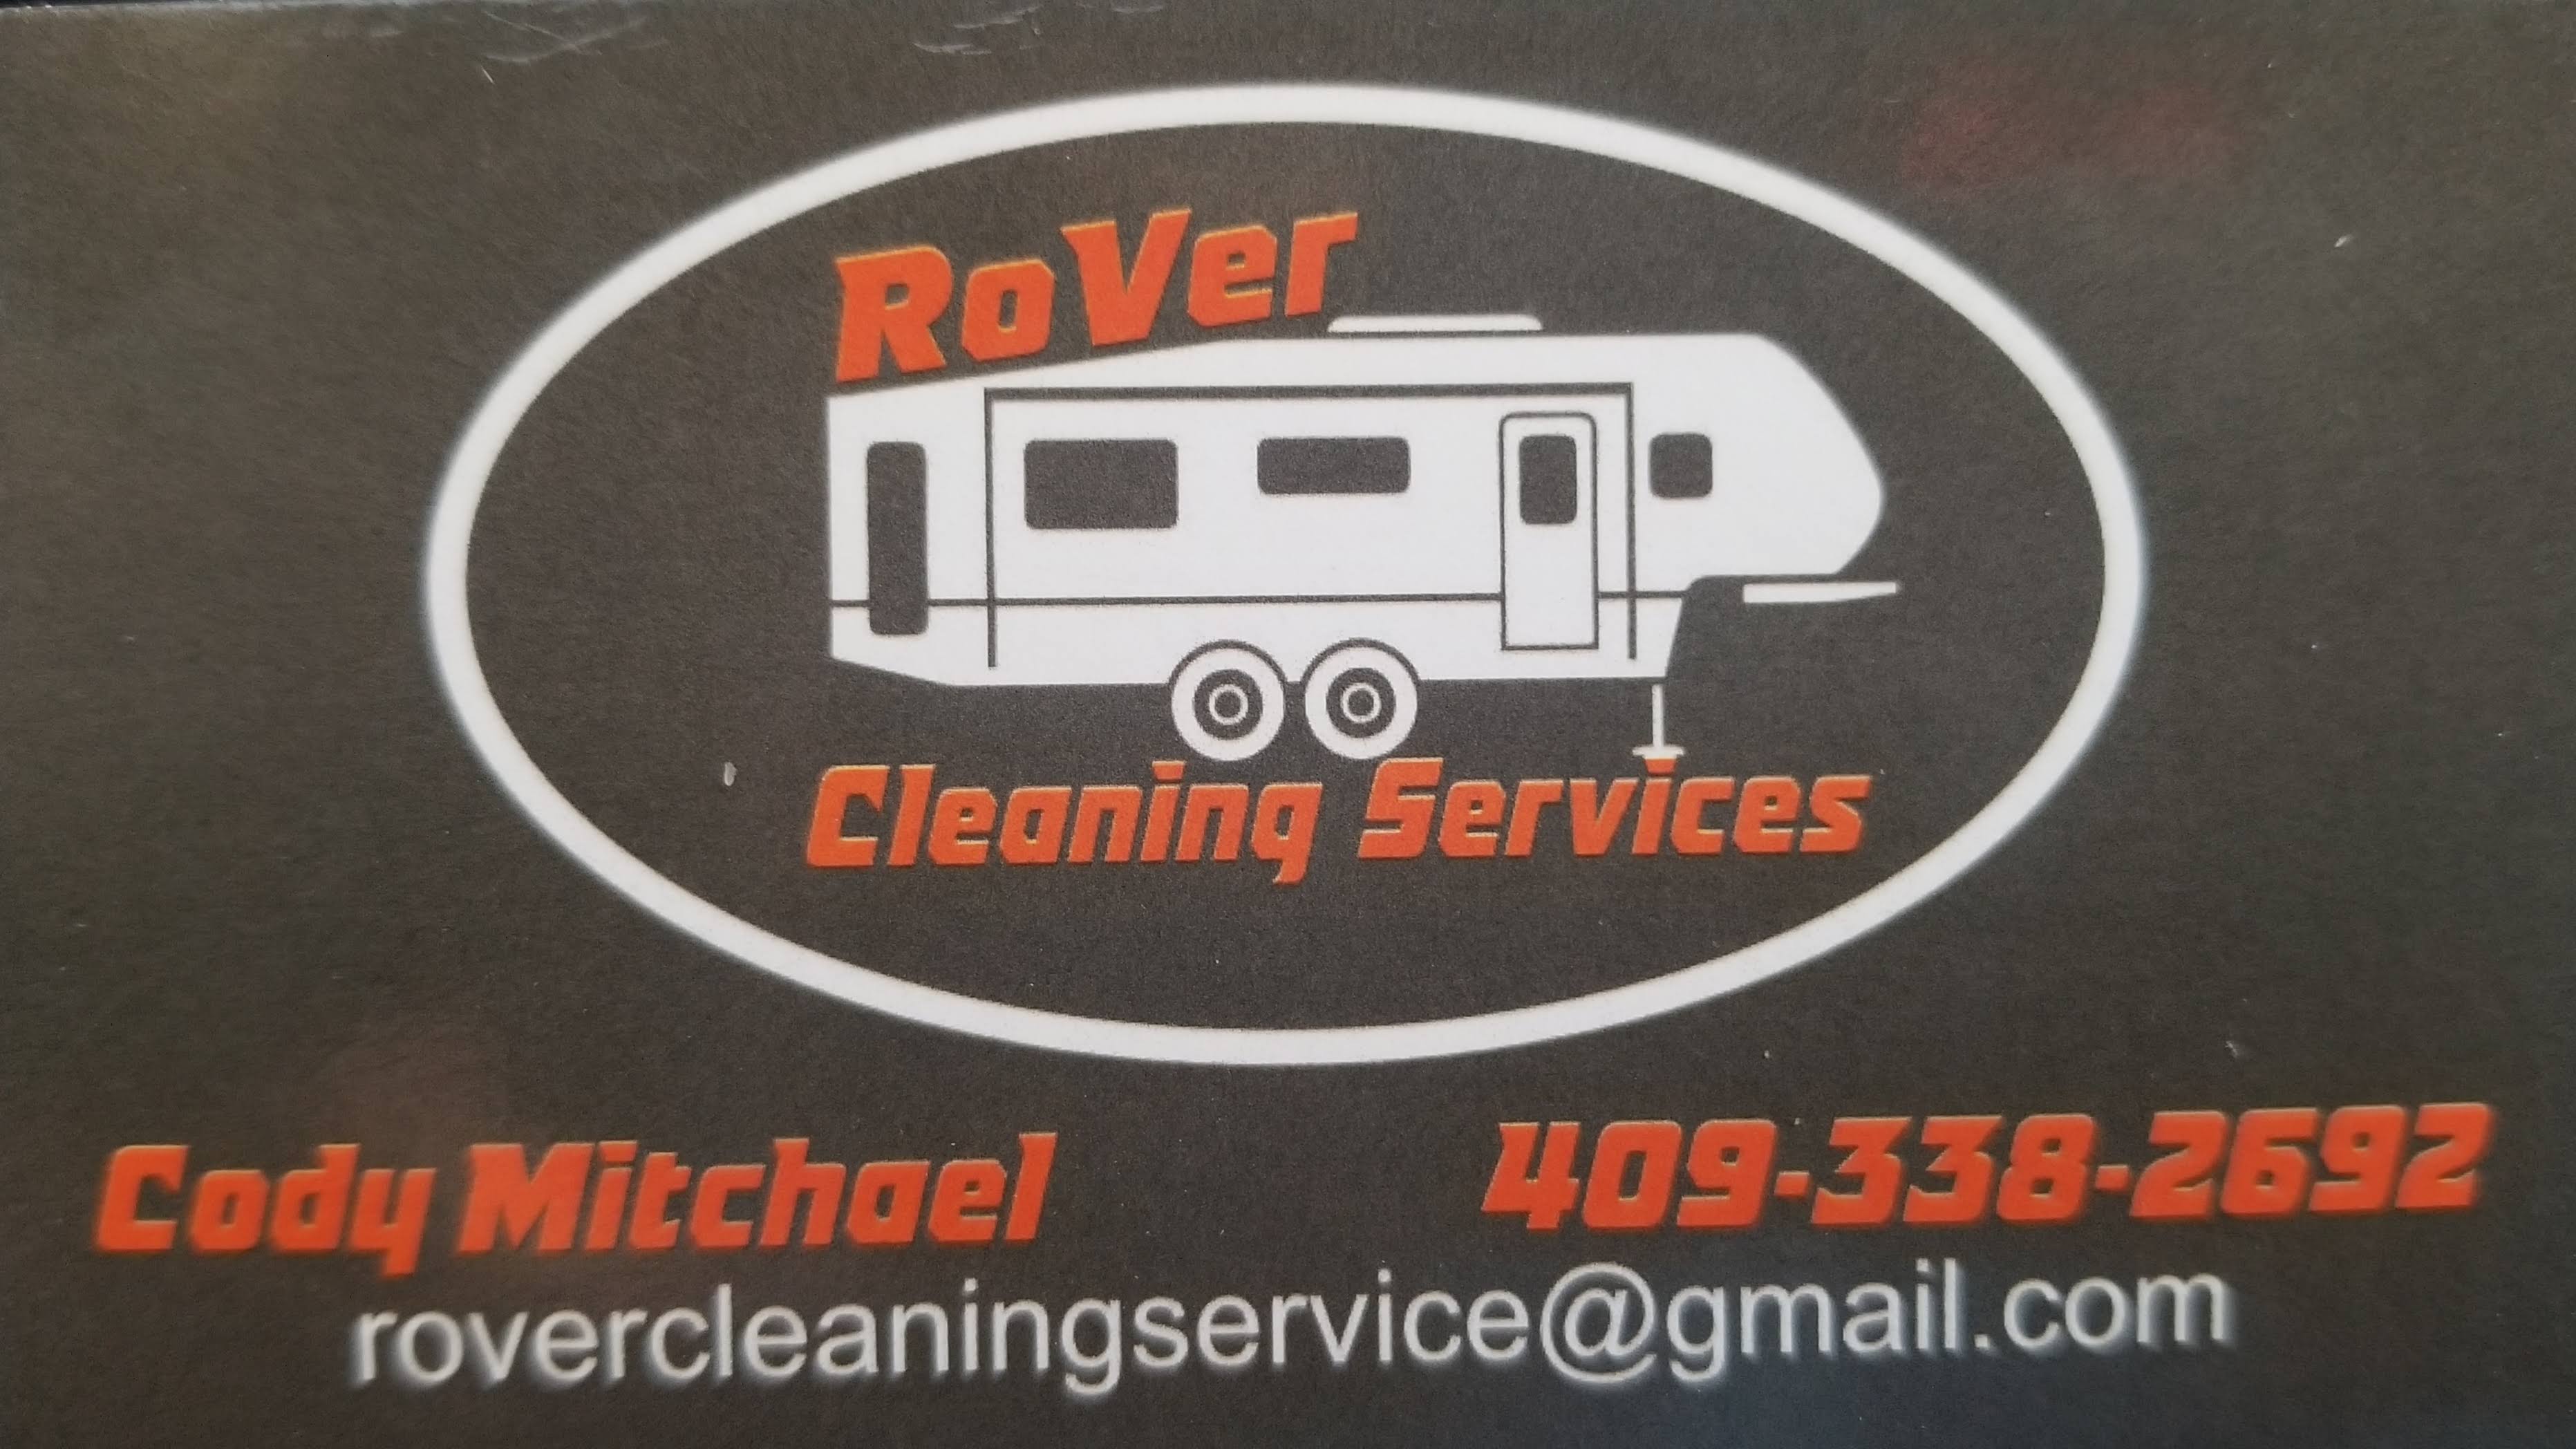 RoVer Cleaning Services Logo